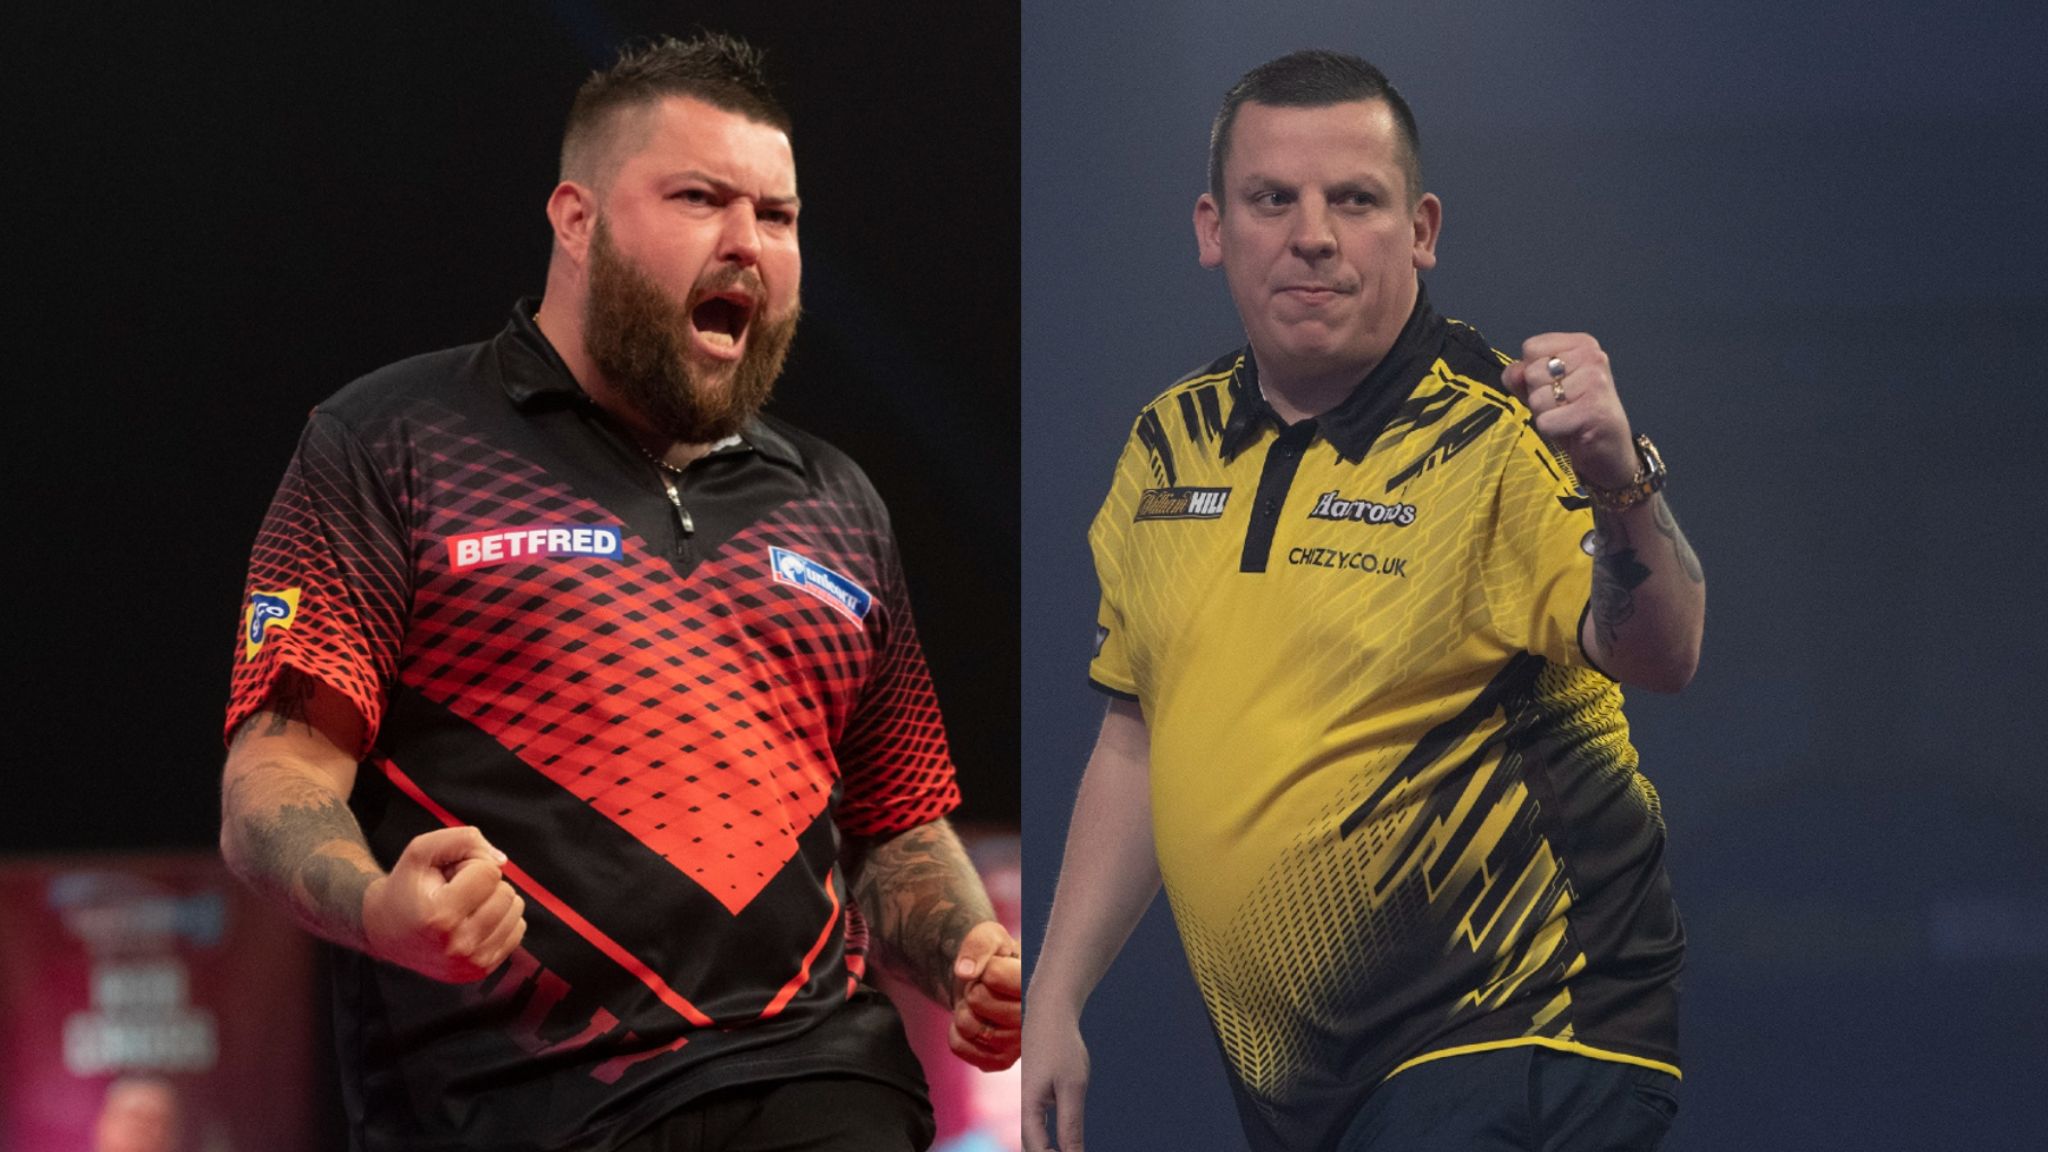 Premier League Darts 2021: The contenders for the final pick in this year's ahead of the Masters | News Sky Sports